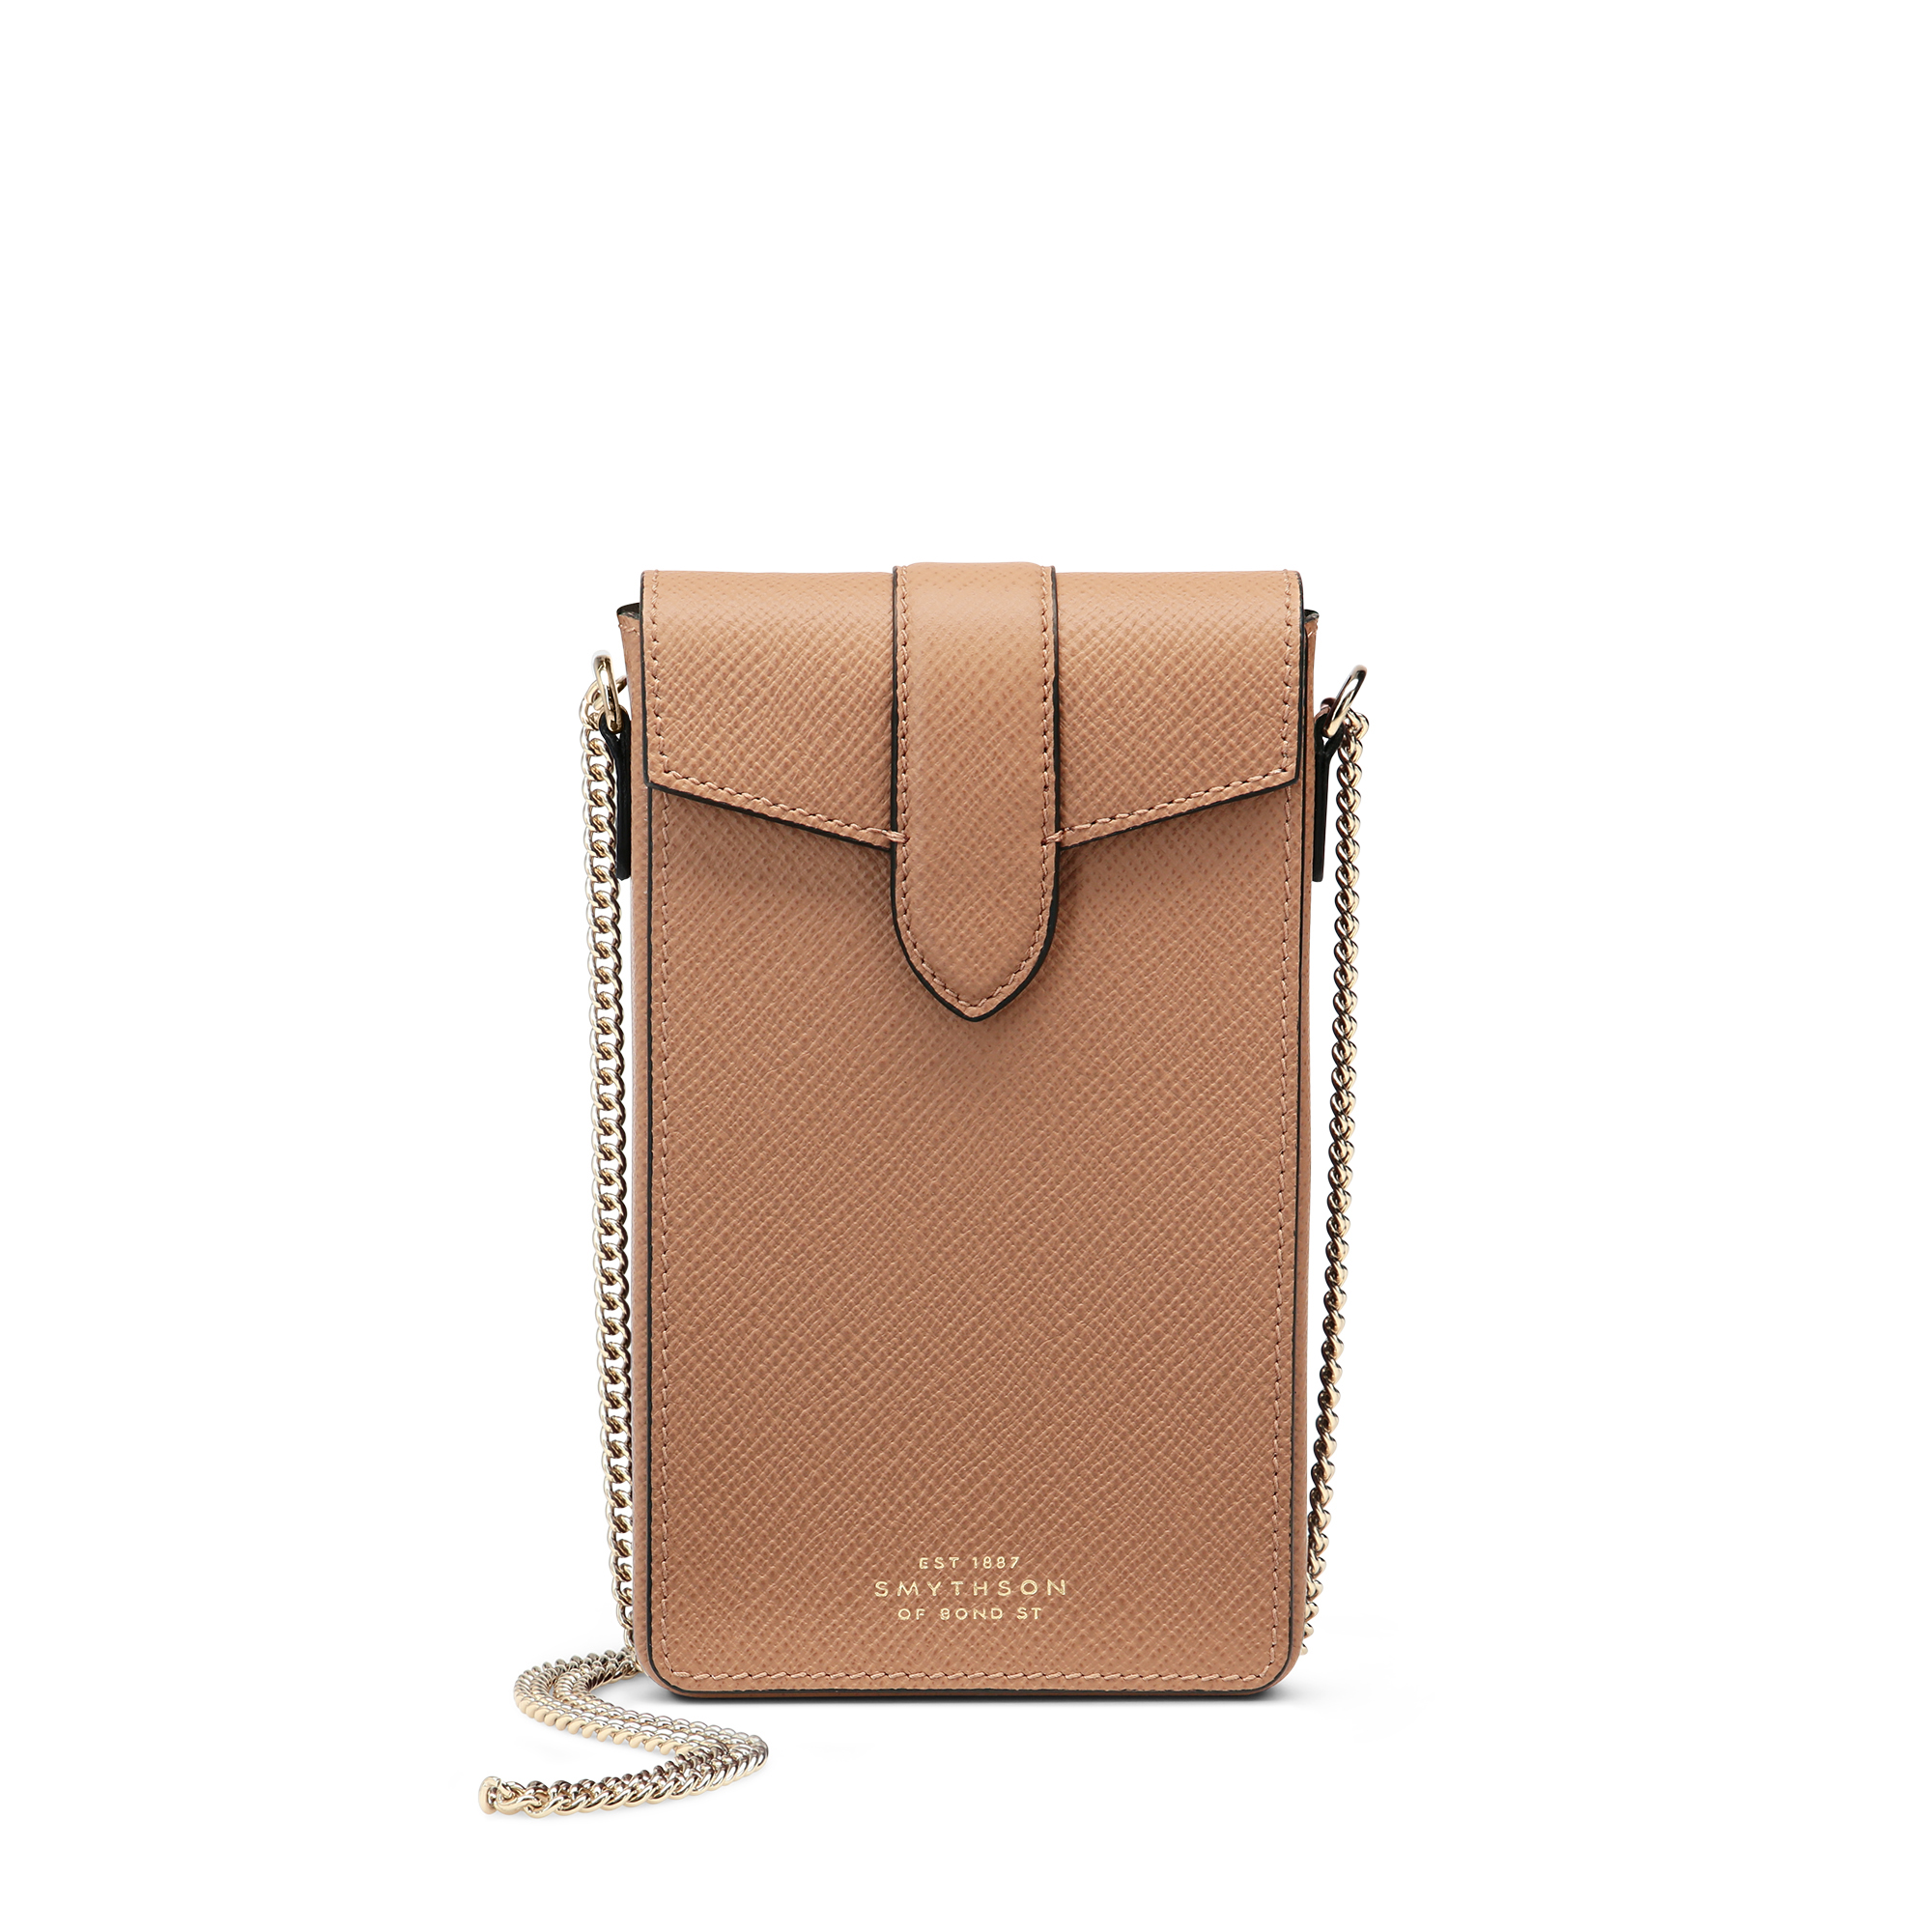 SMYTHSON SMYTHSON PHONE CASE WITH CHAIN IN PANAMA,1029561